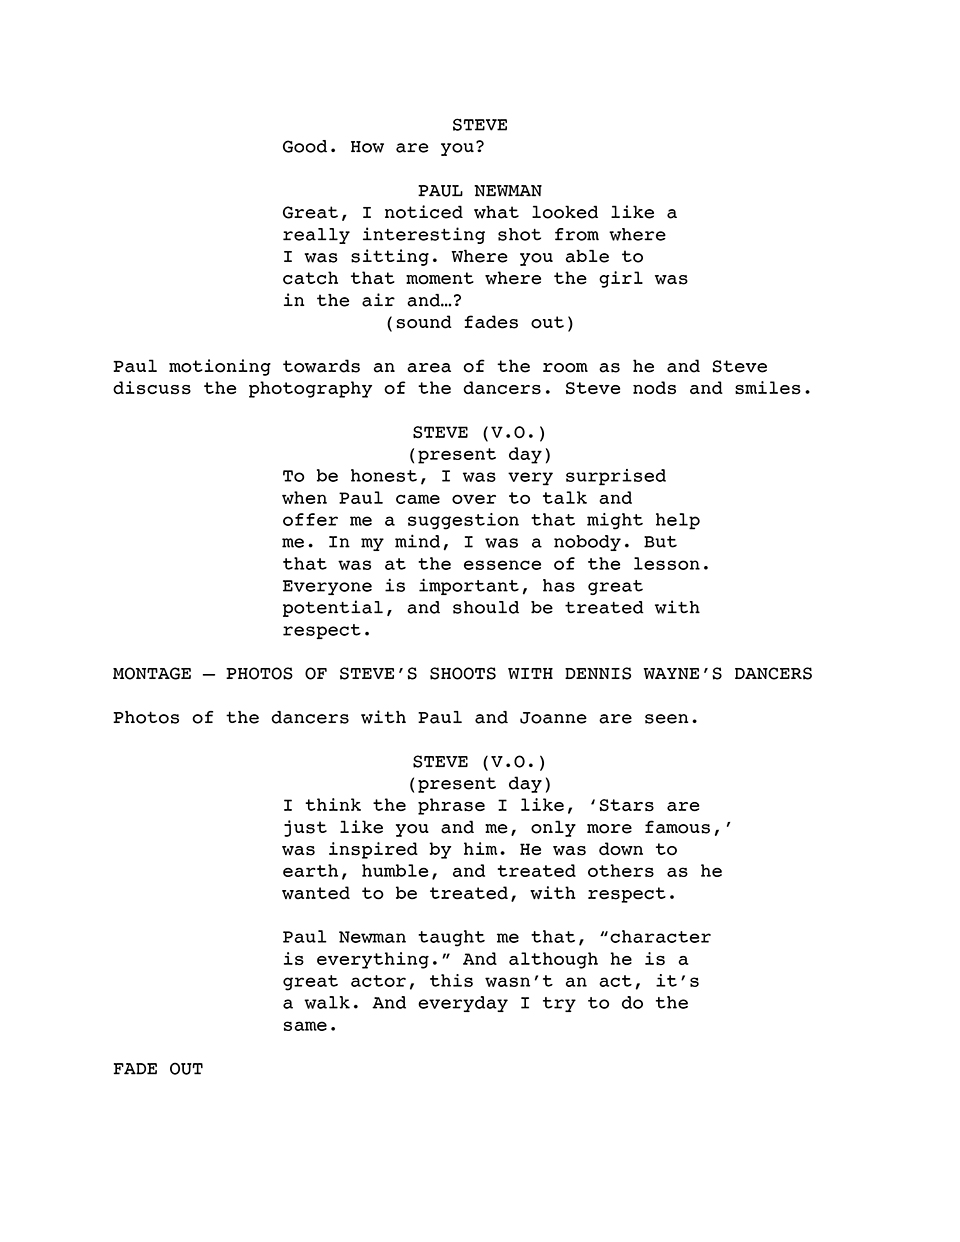 final page five of a screenplay formatted short story of photographer Steve Landis's experiences photographing Paul Newman during the summer of 1977.